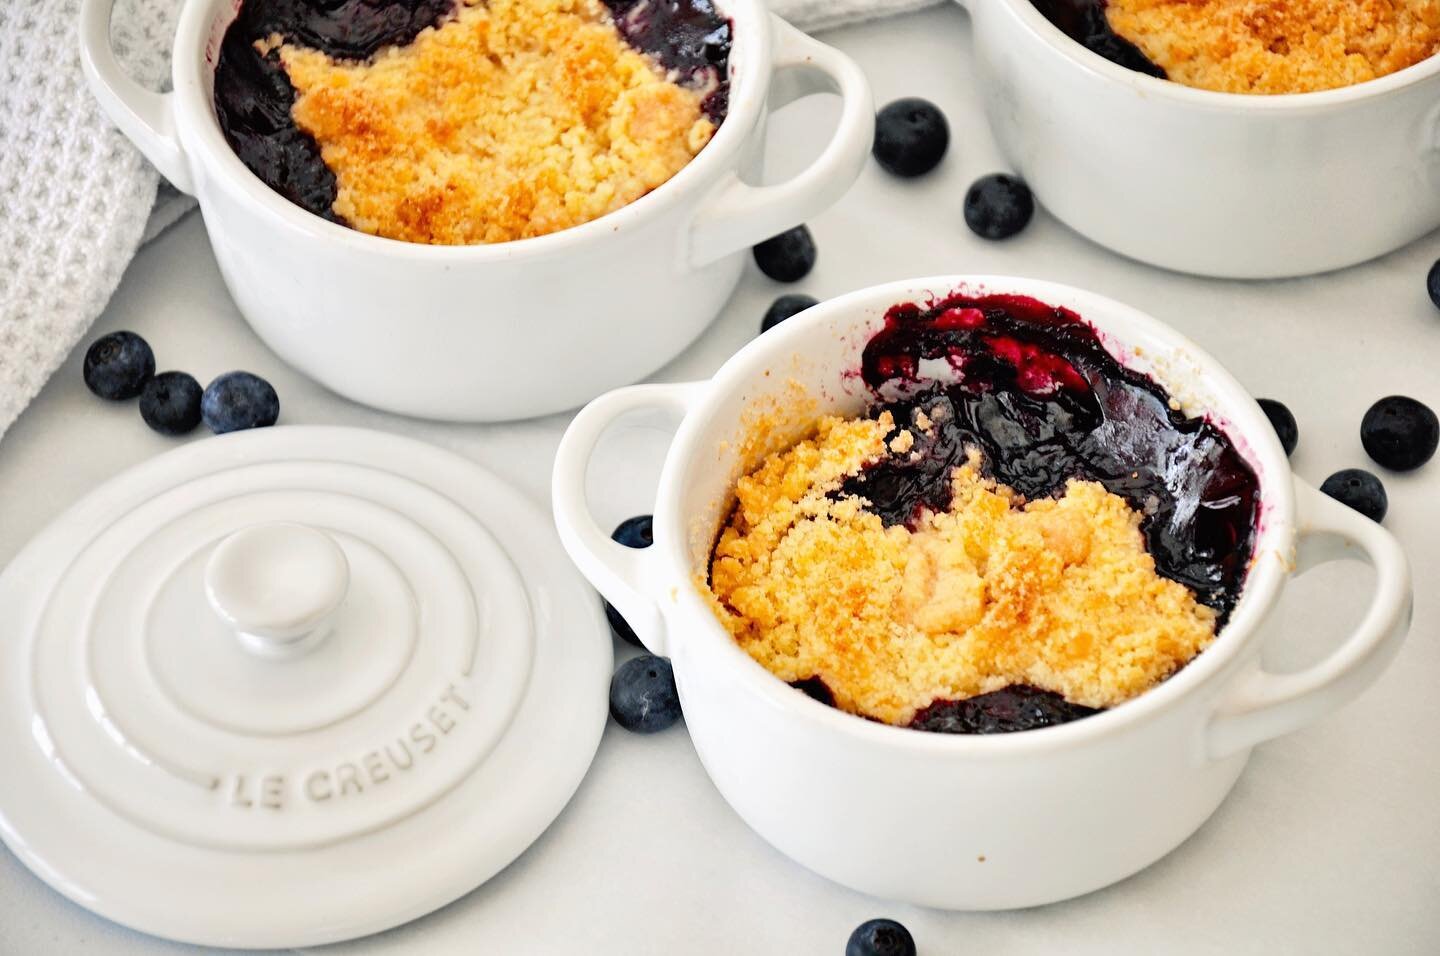 Summer Blueberry Crumbles. Super simple, super fresh, super delicious summer dessert. Easily gluten free with @cup4cup gluten free flour in the crumble. Prepared for individual servings  in @lecreuset mini coccettes. 
-
-
-
#blueberrycrumble #gigisty